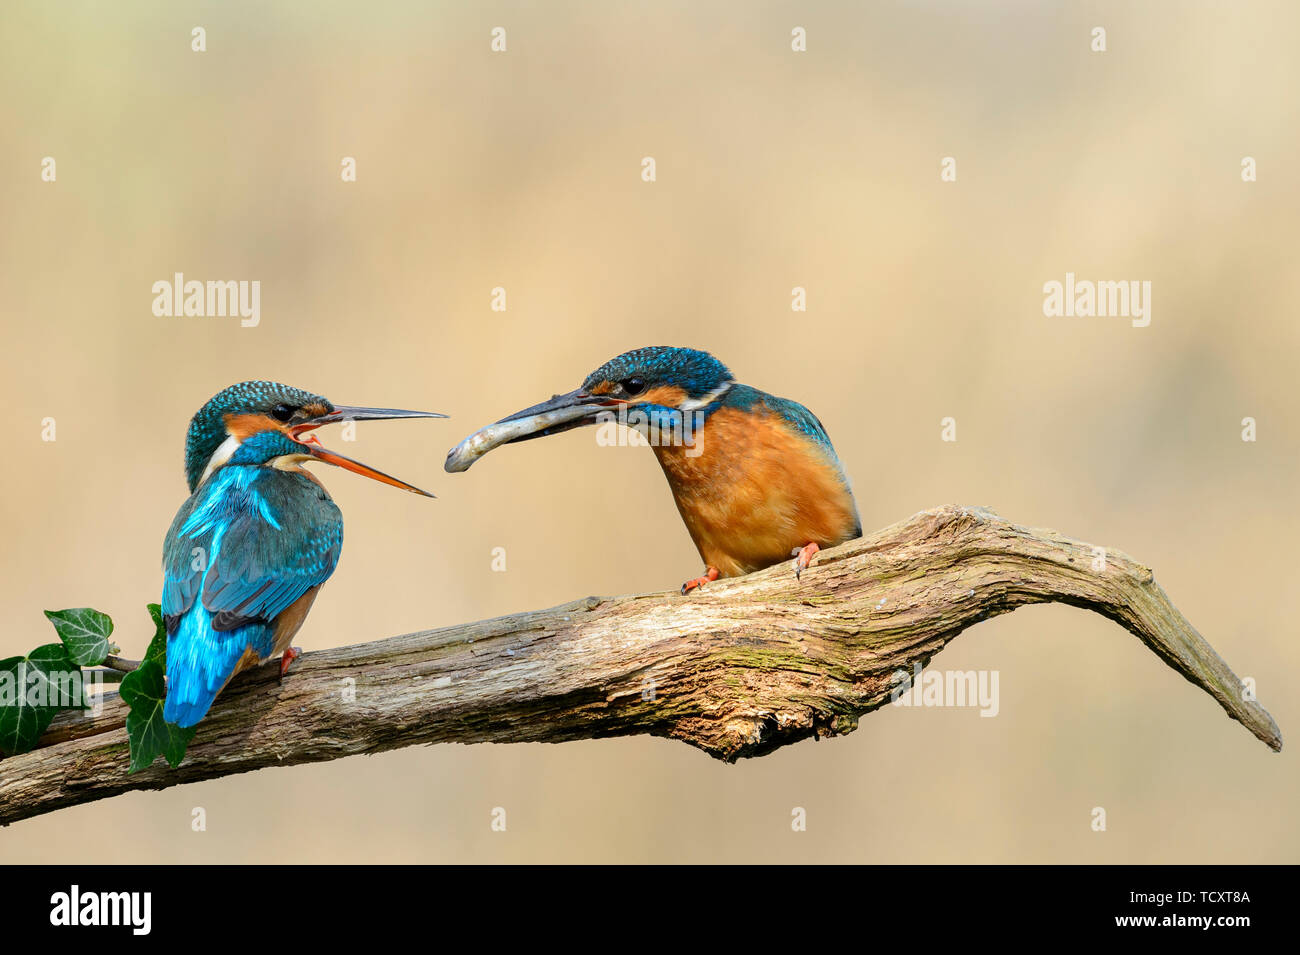 Pair of Kingfishers in courtship season with the male passing a fish to the female Stock Photo